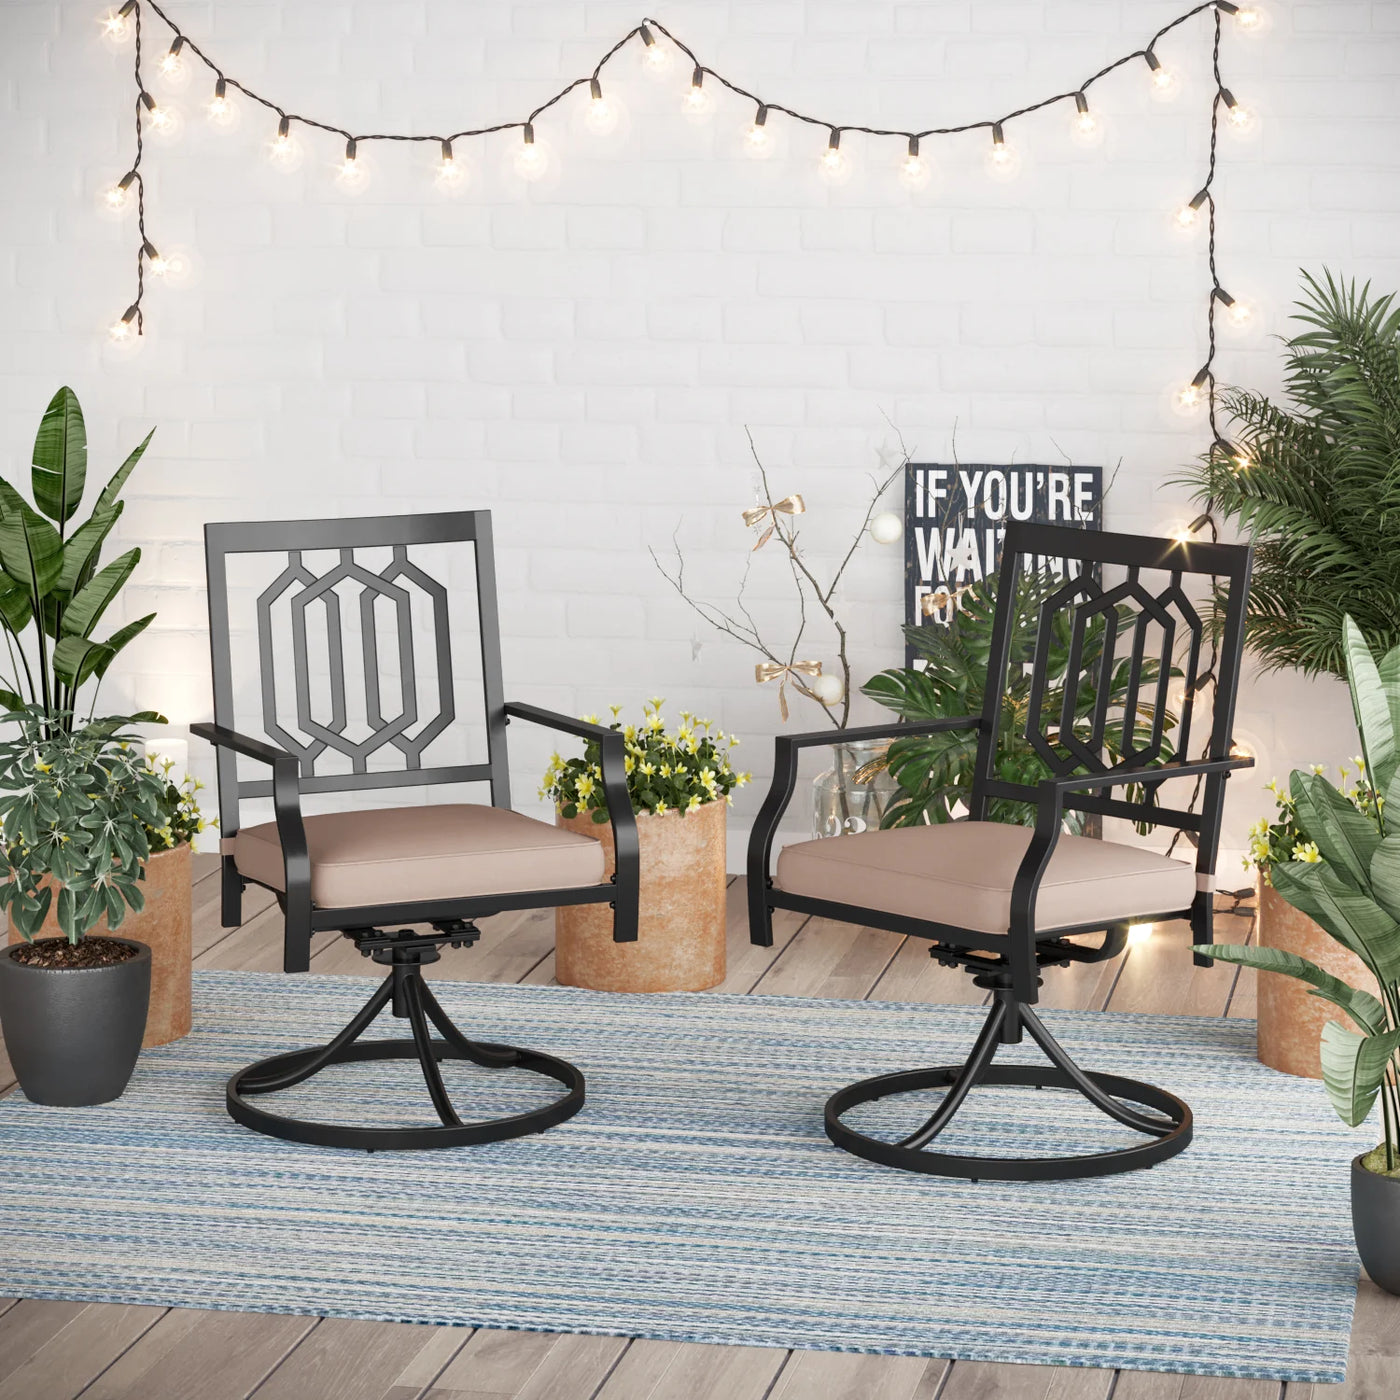 Phi Villa Outdoor Metal Dining Chairs fits Garden Backyard Chairs Furniture - Set of 2 - $235